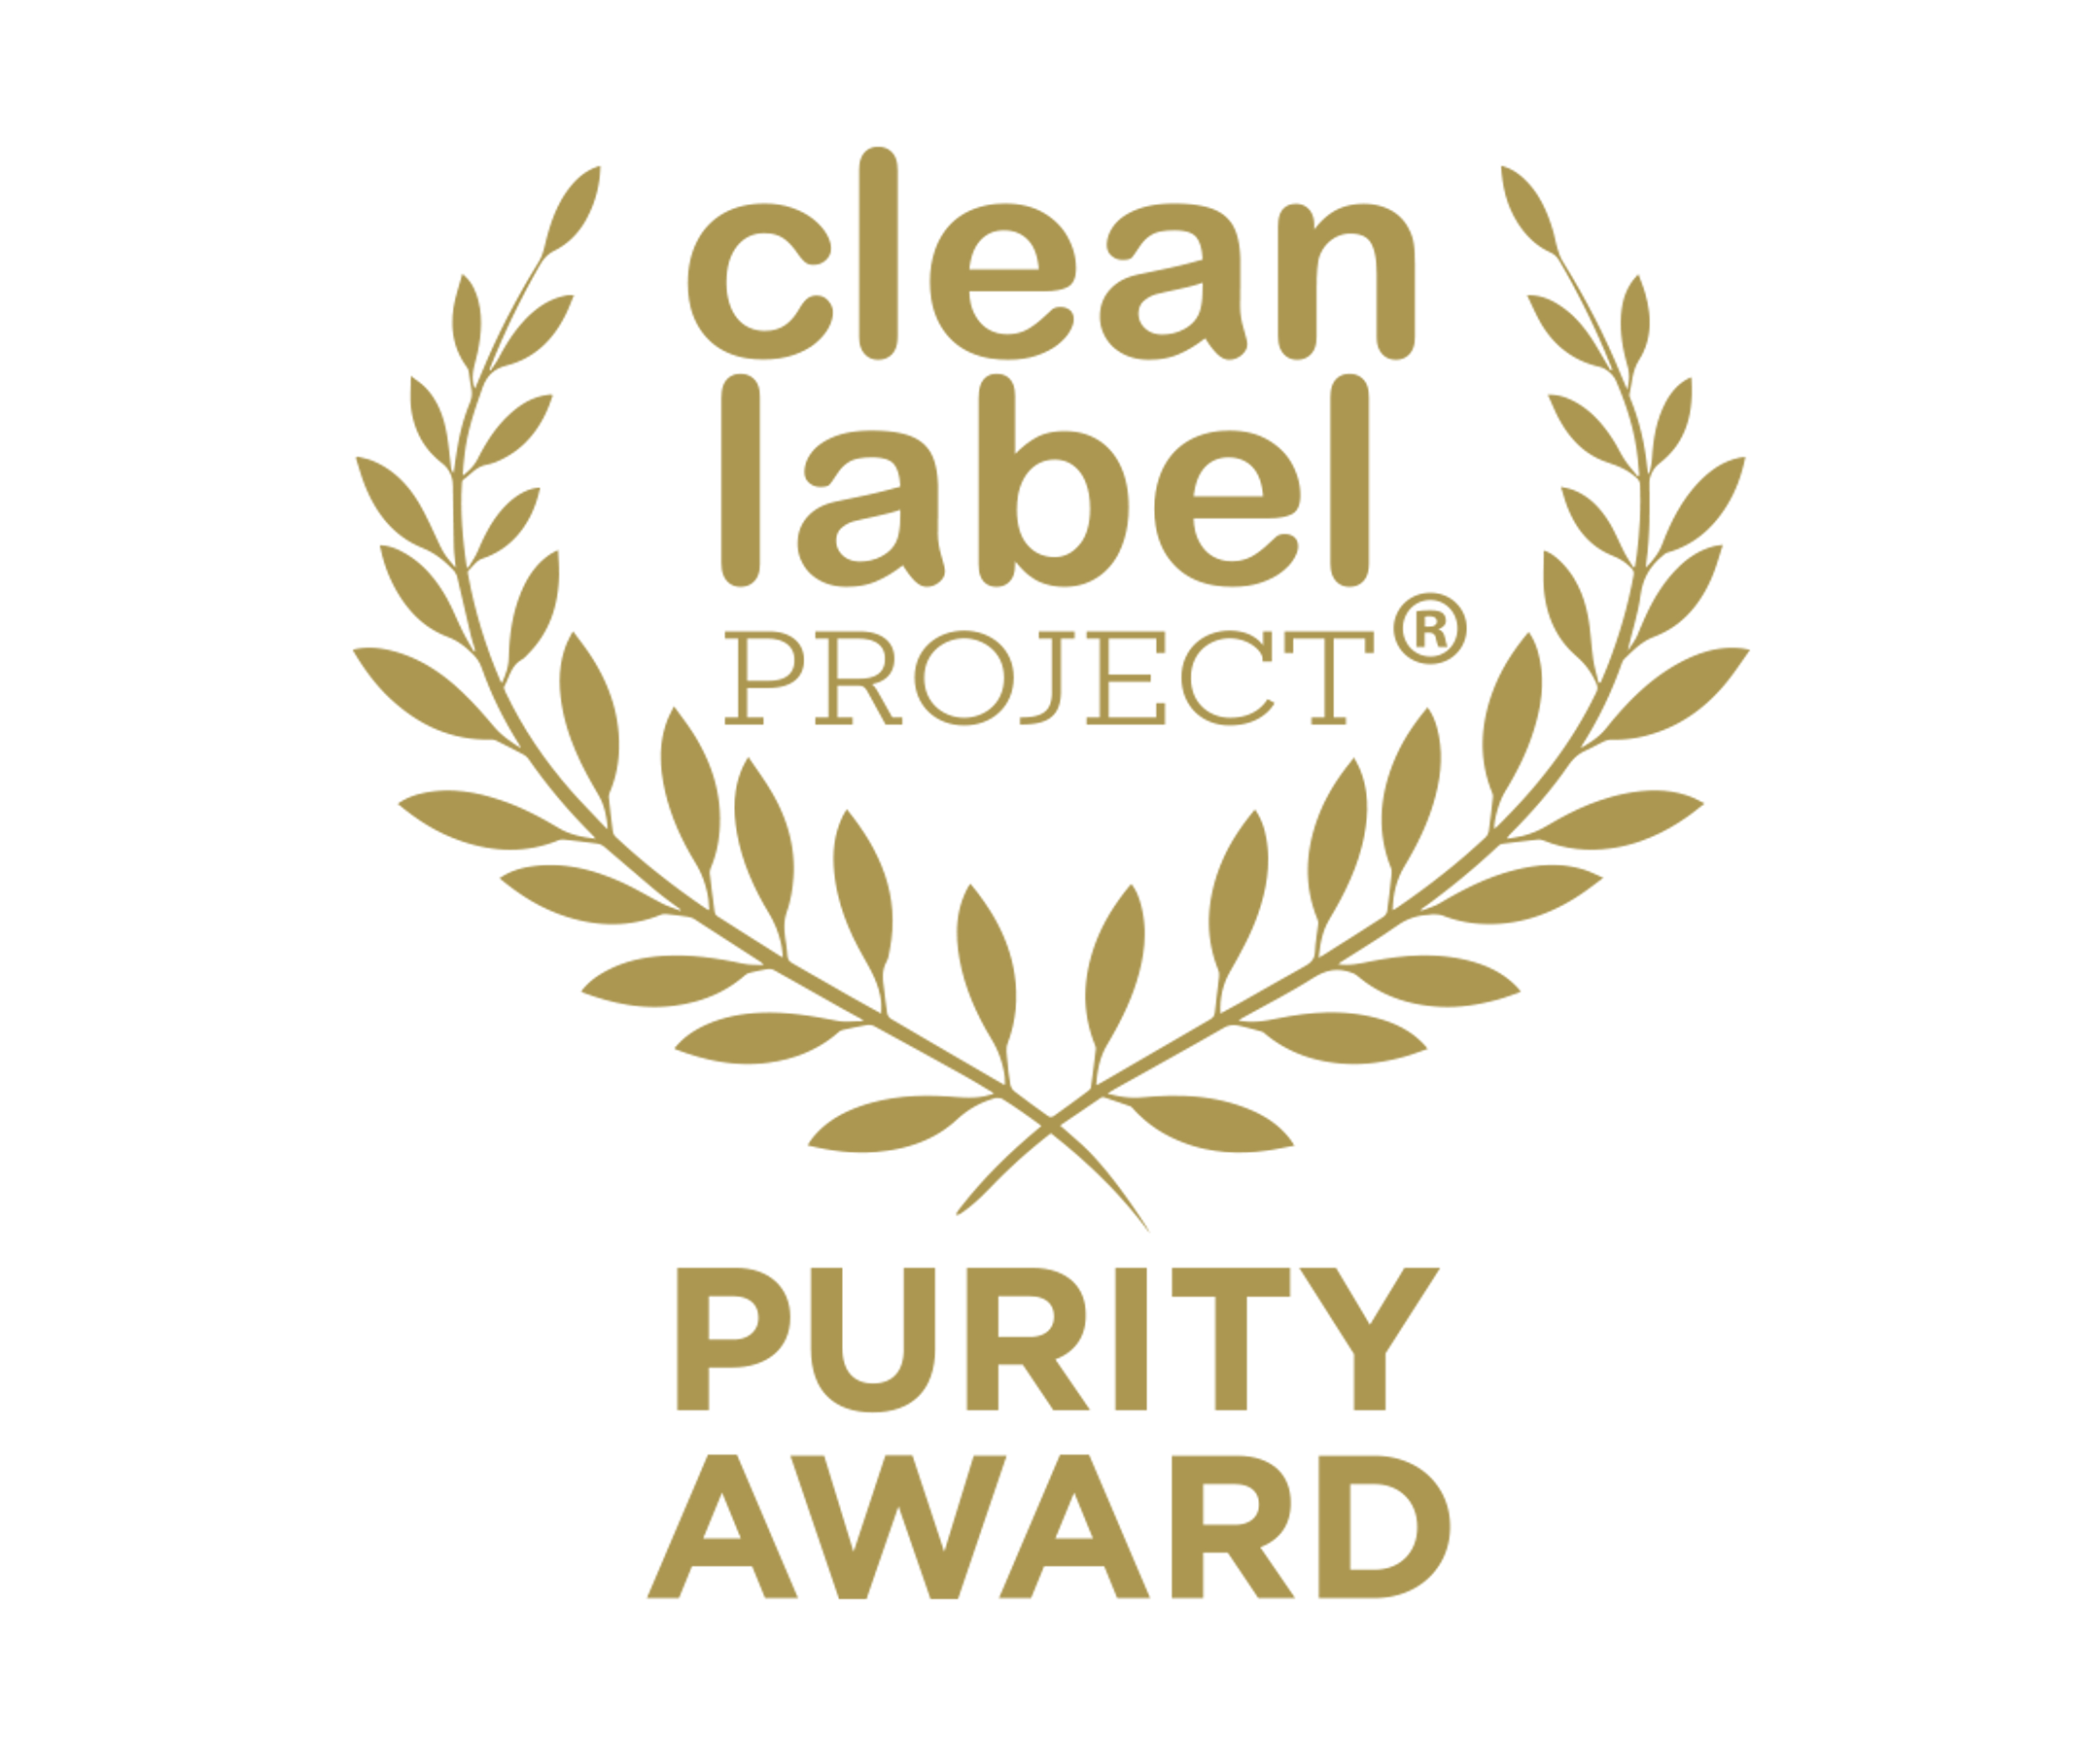 Clean Label Project Purity Award logo